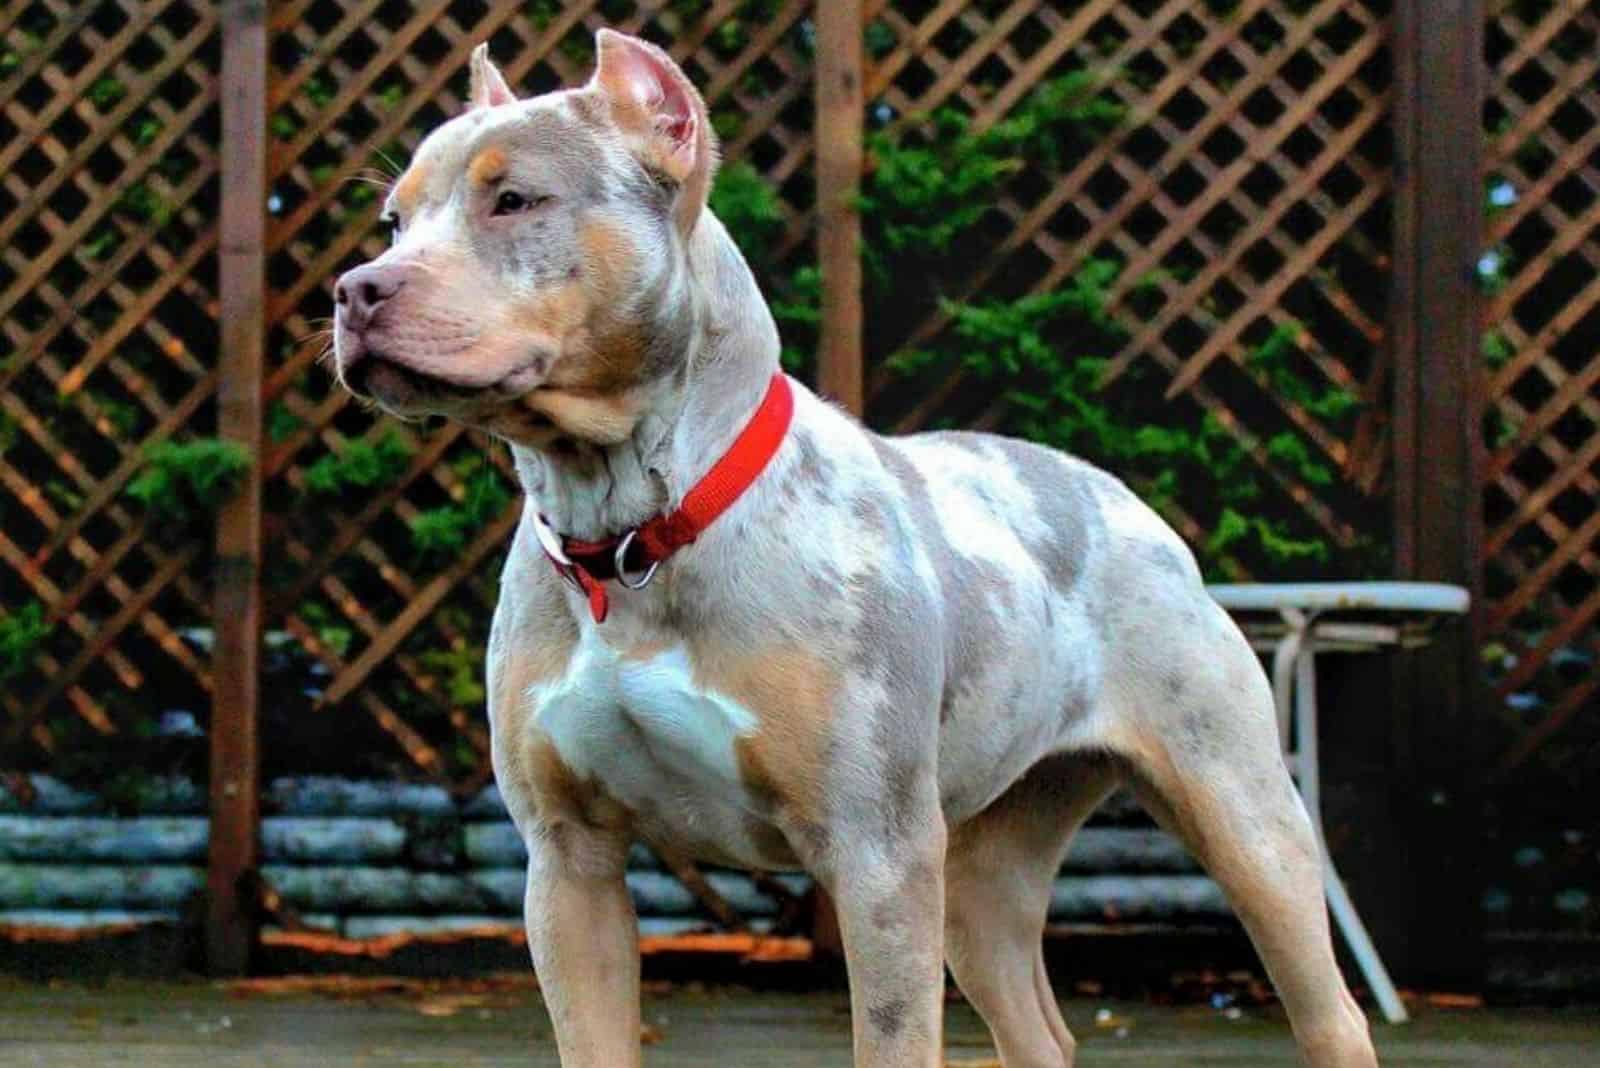 American Pit Bull Terrier - Wikipedia Blue Merle Pit Bull - The Definitive Tri...